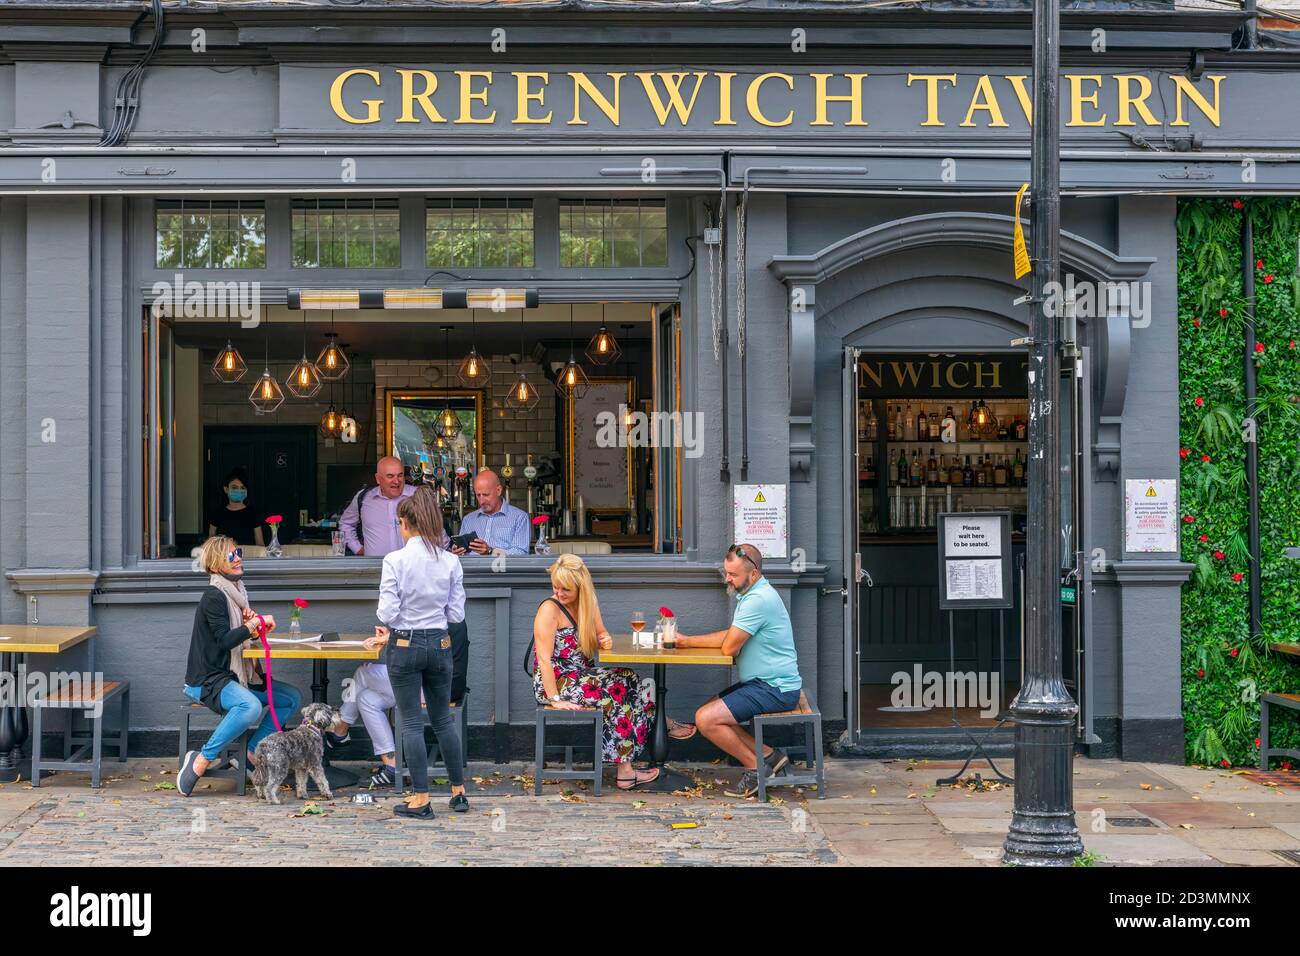 People enjoy a 'socially distanced' drink in the sunshine on the pavement outside the Greenwich Tavern near the Royal Maritime Museum in Greenwich, Lo Stock Photo